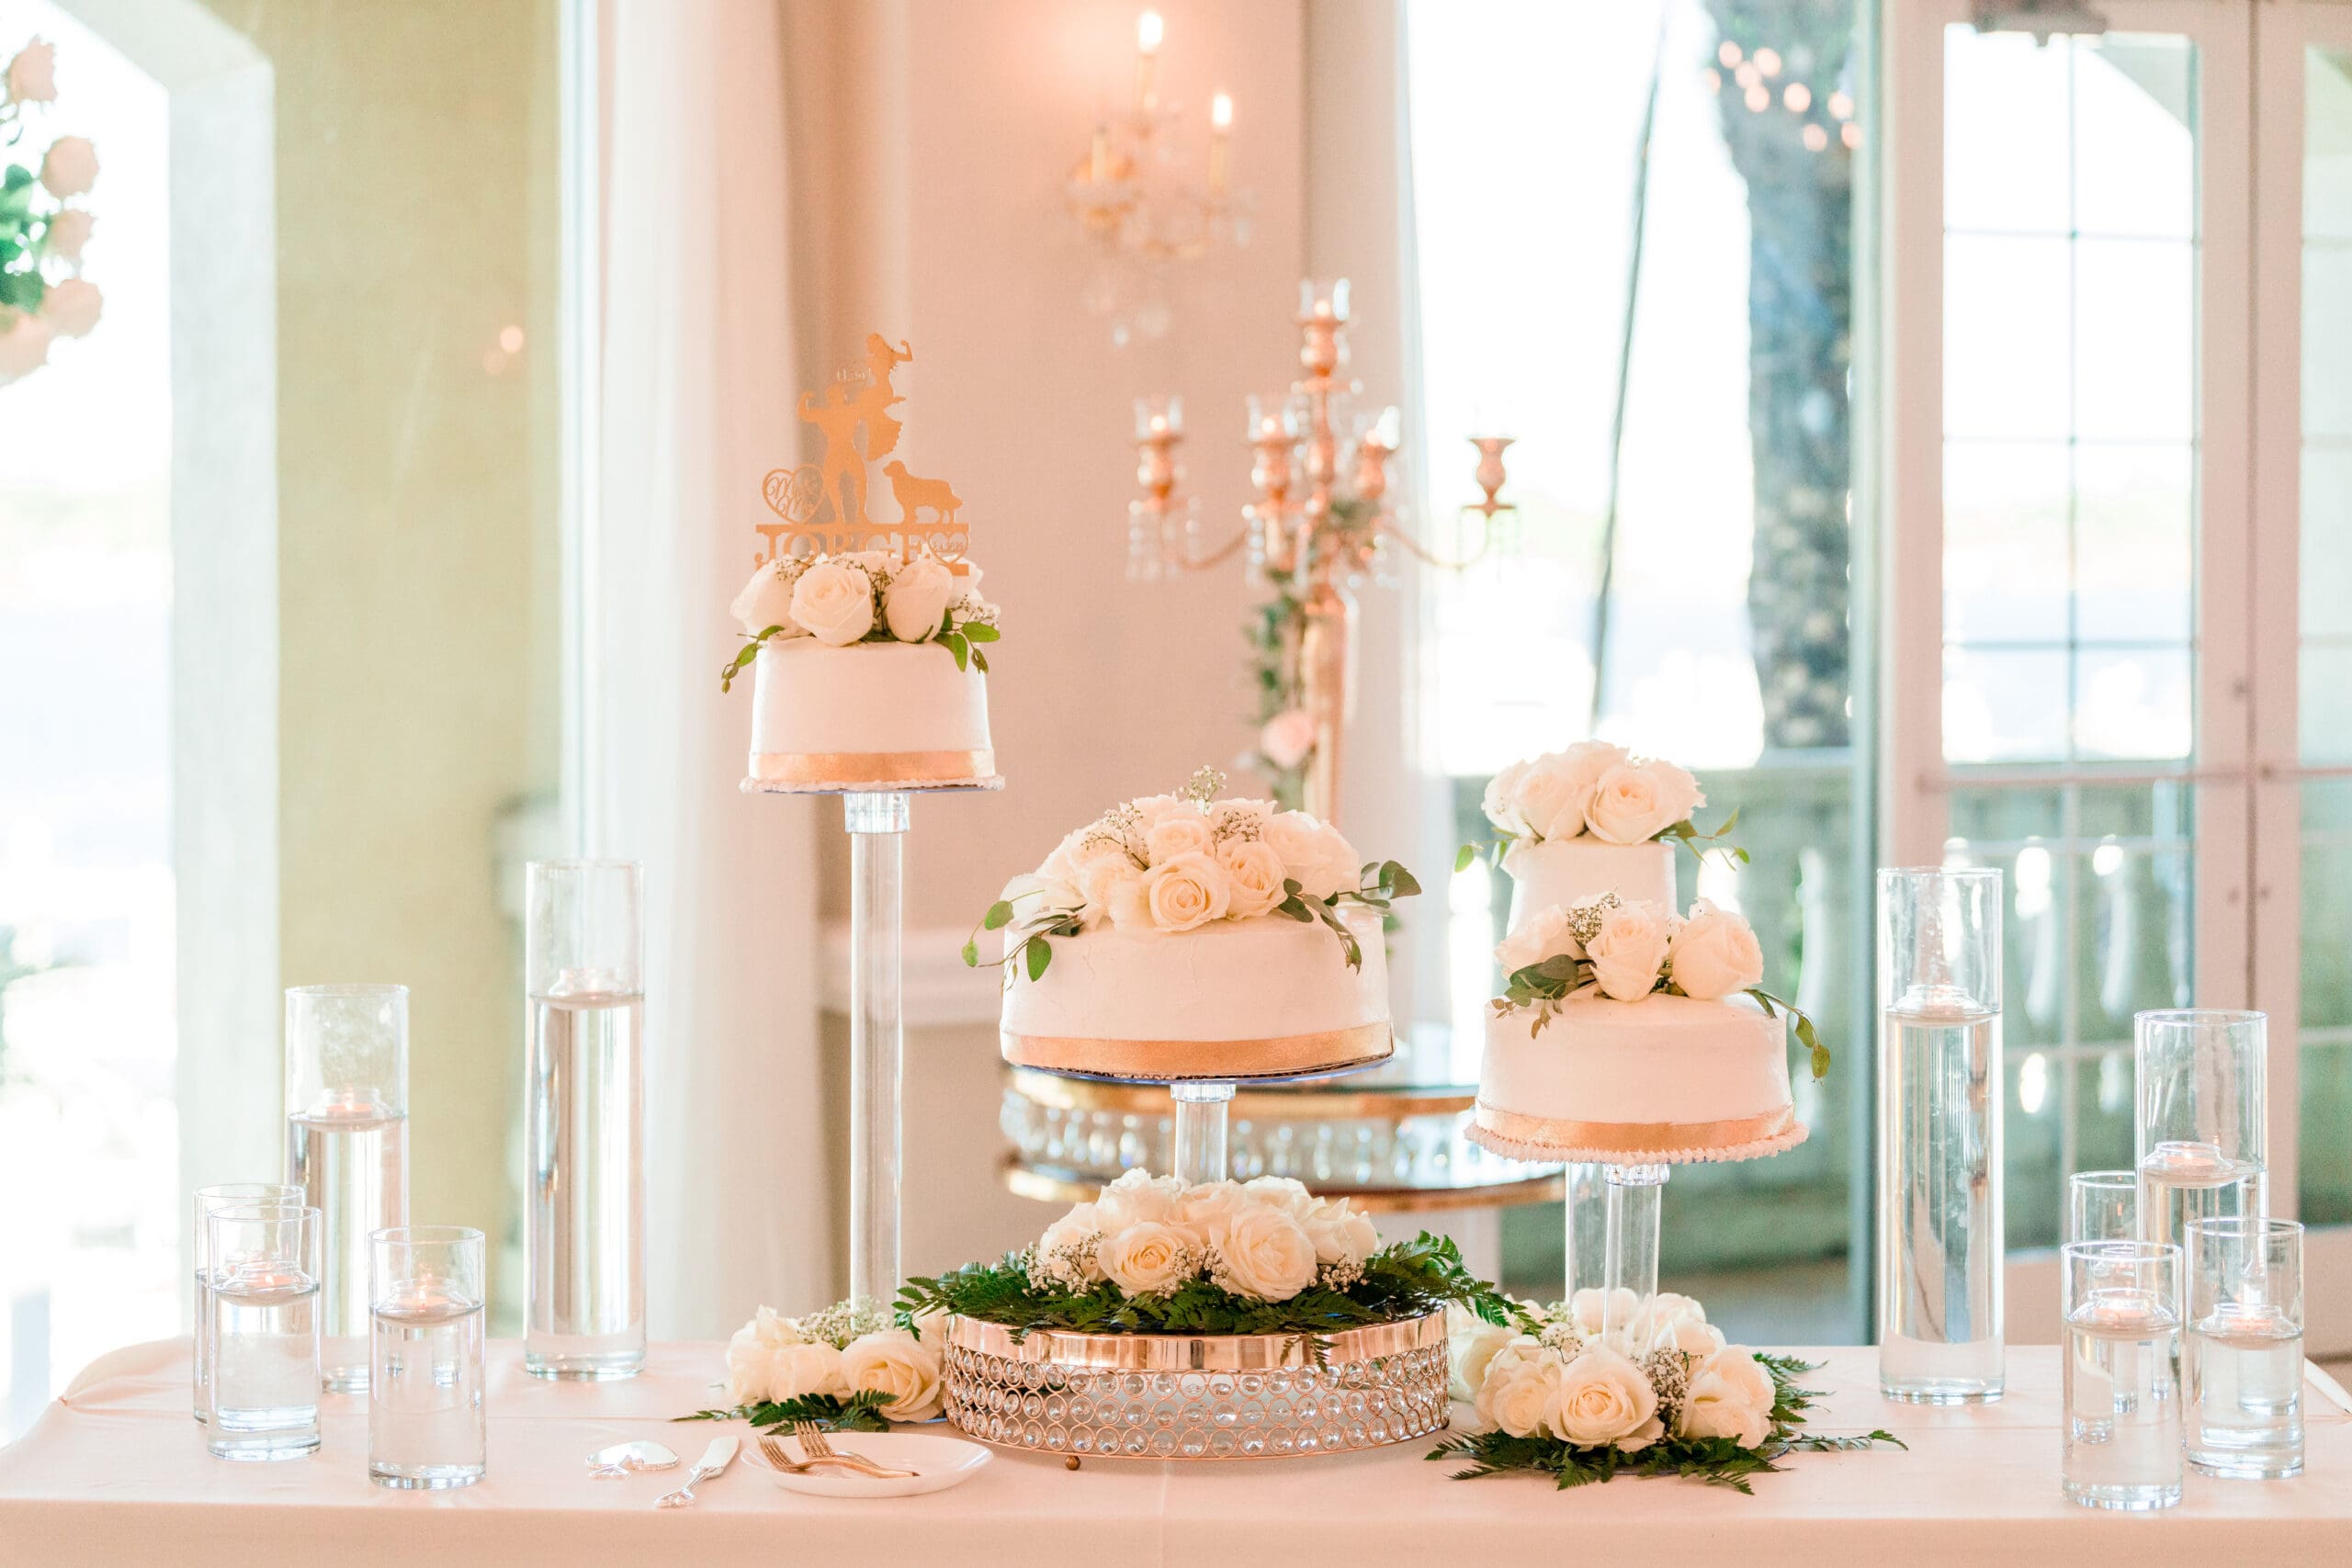 Wedding cake adorned with white edible flowers on multiple tiers, displayed on a table with a pink tablecloth